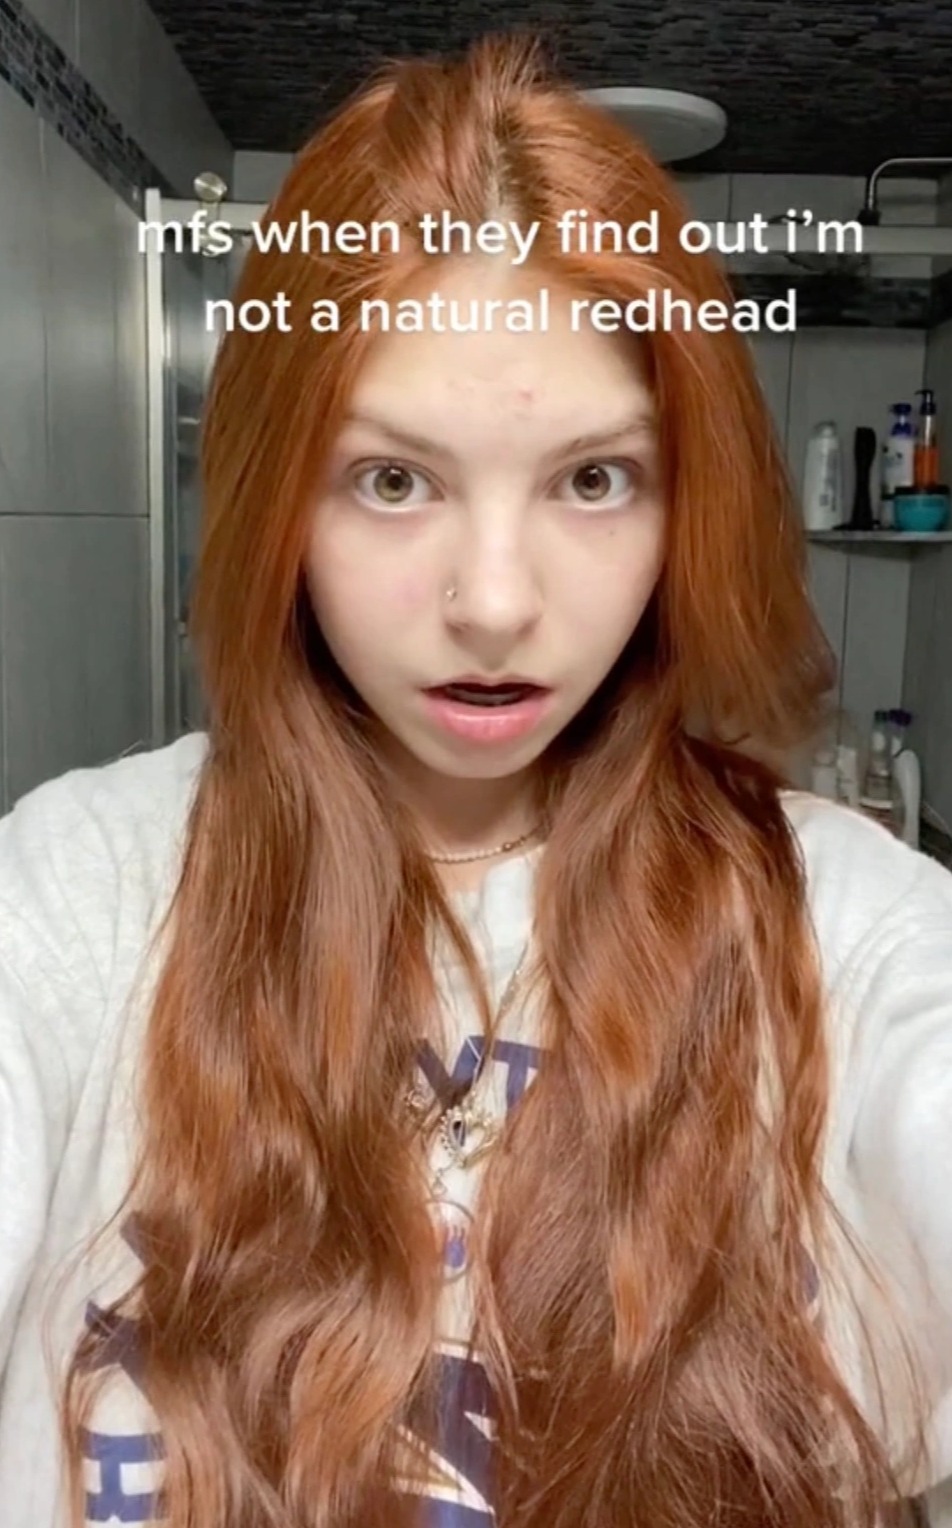 adriana sykes recommends red hair pubic hair color pic